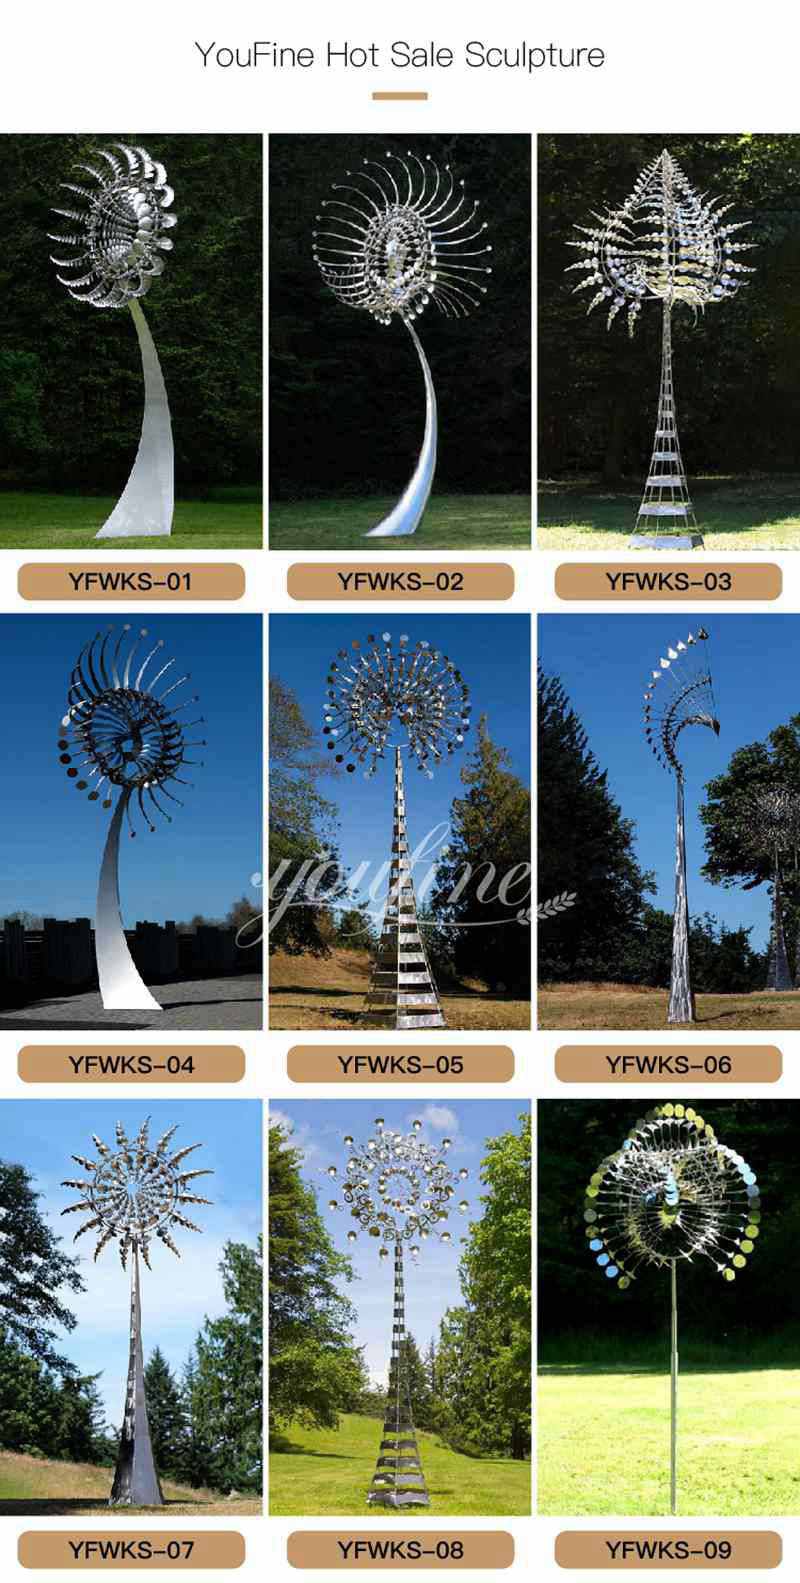 More Large Metal Kinetic Wind Spinners Sculpture for Sale